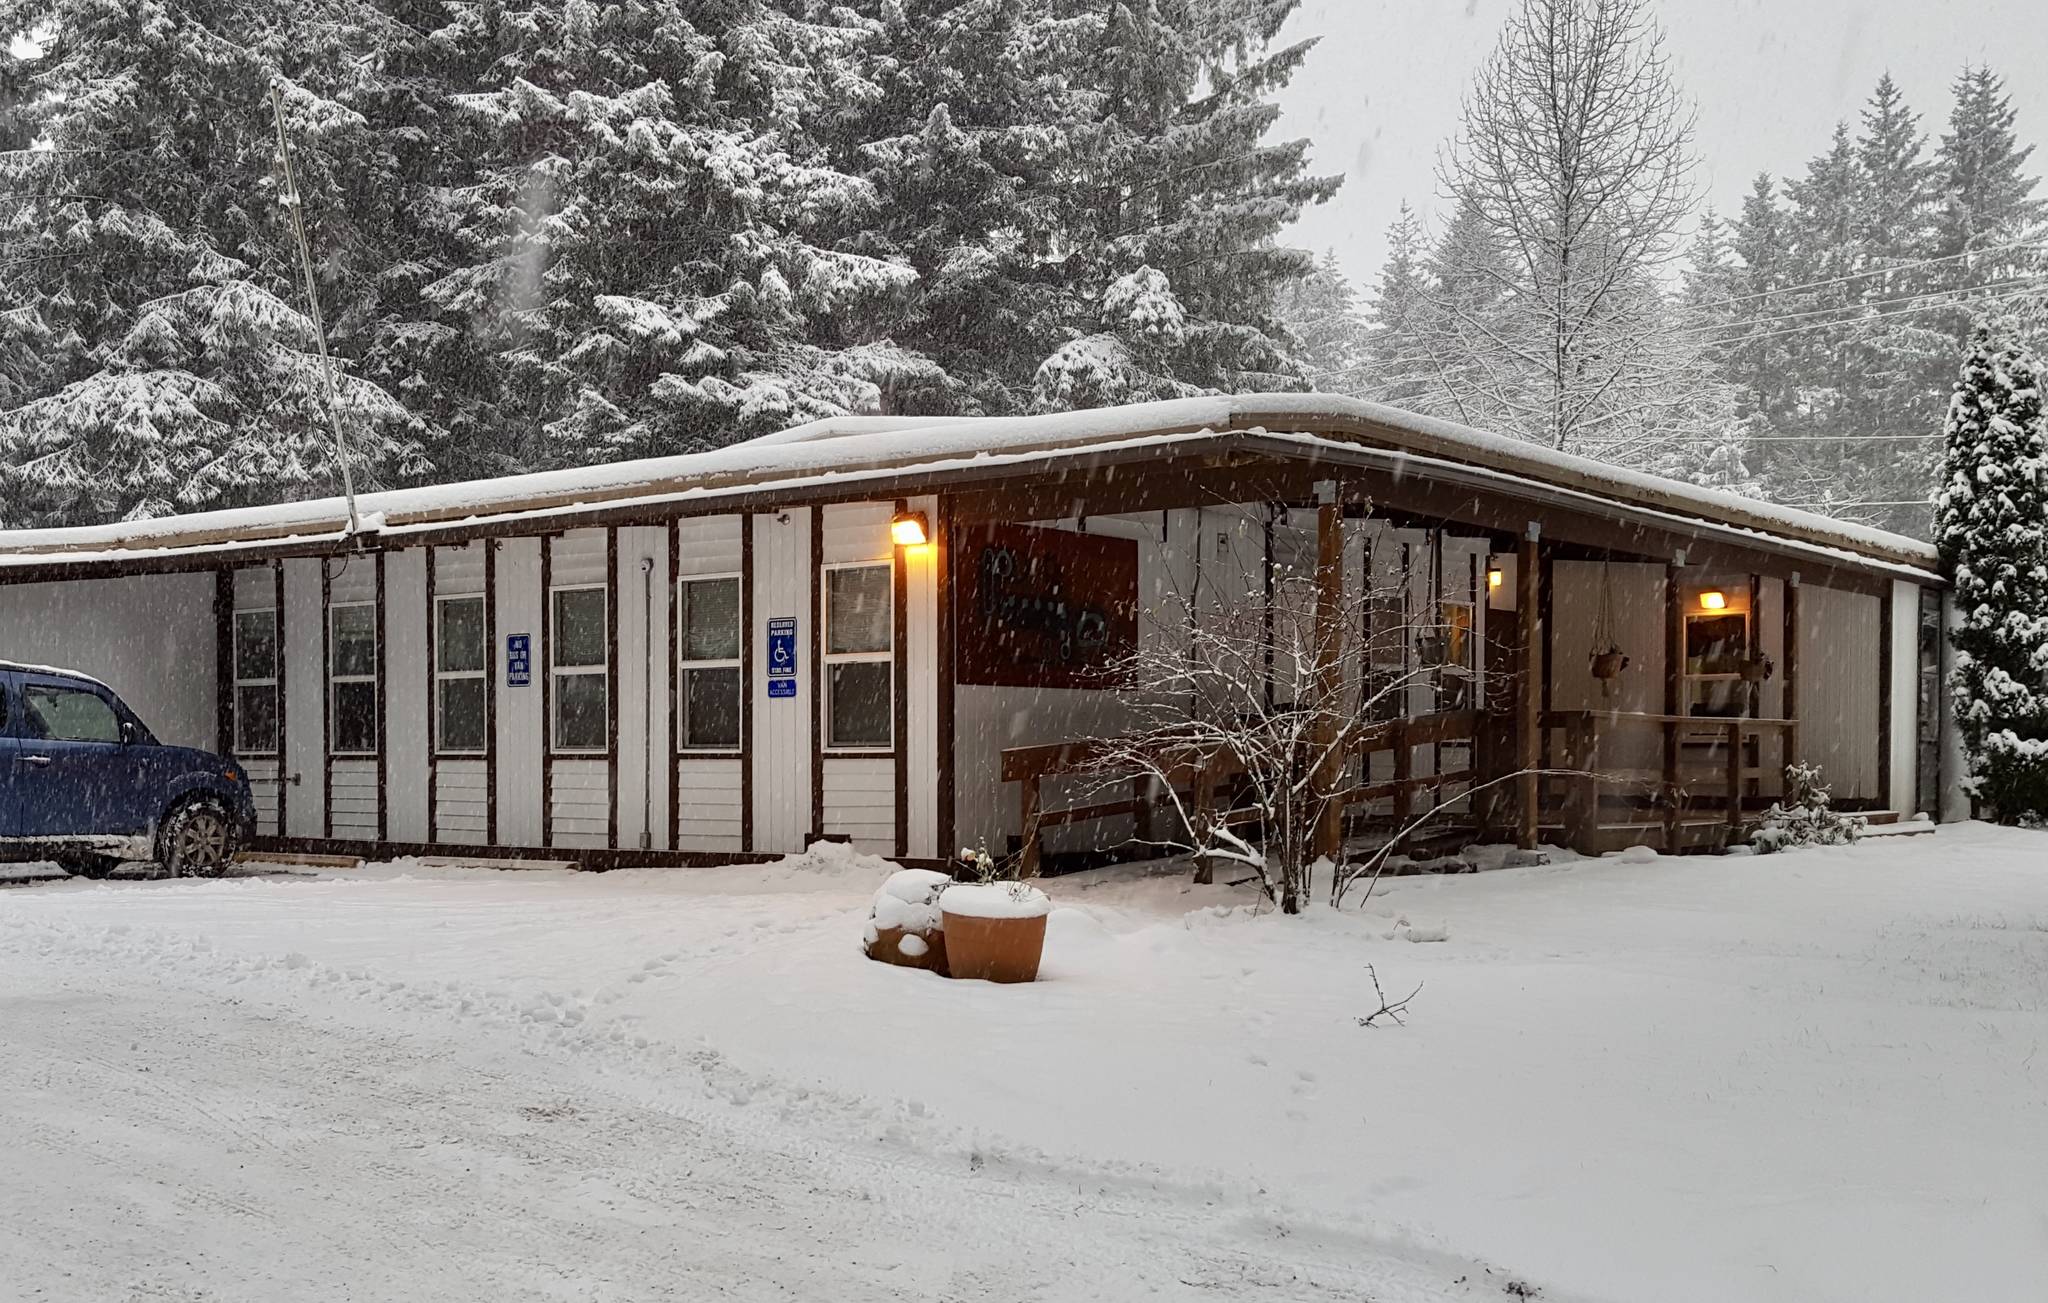 The city-owned property at 9290 Hurlock Avenue went up for sale at the beginning of the month, and six local organizations have applied to take over the location. (Courtesy photo | City and Borough of Juneau)